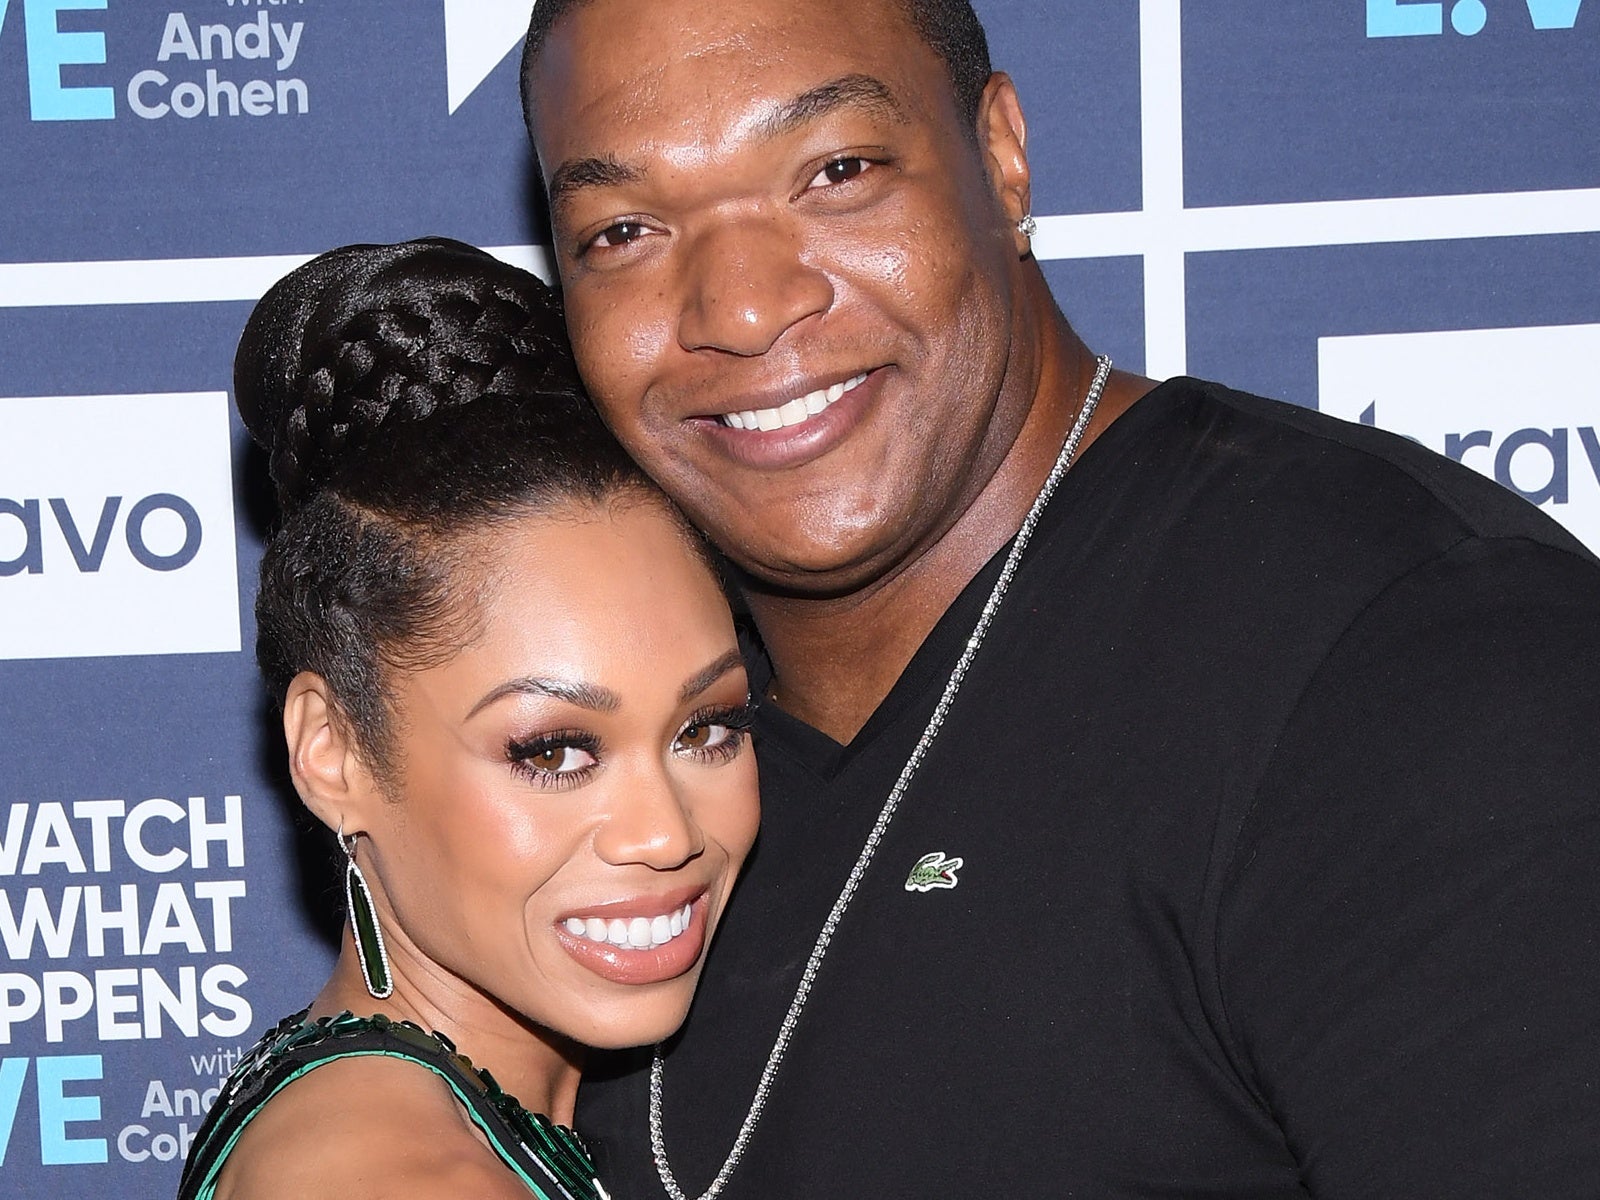 Monique Samuels Files For Divorce From Chris Samuels After 10 Years Of Marriage: A Timeline Of Their Relationship